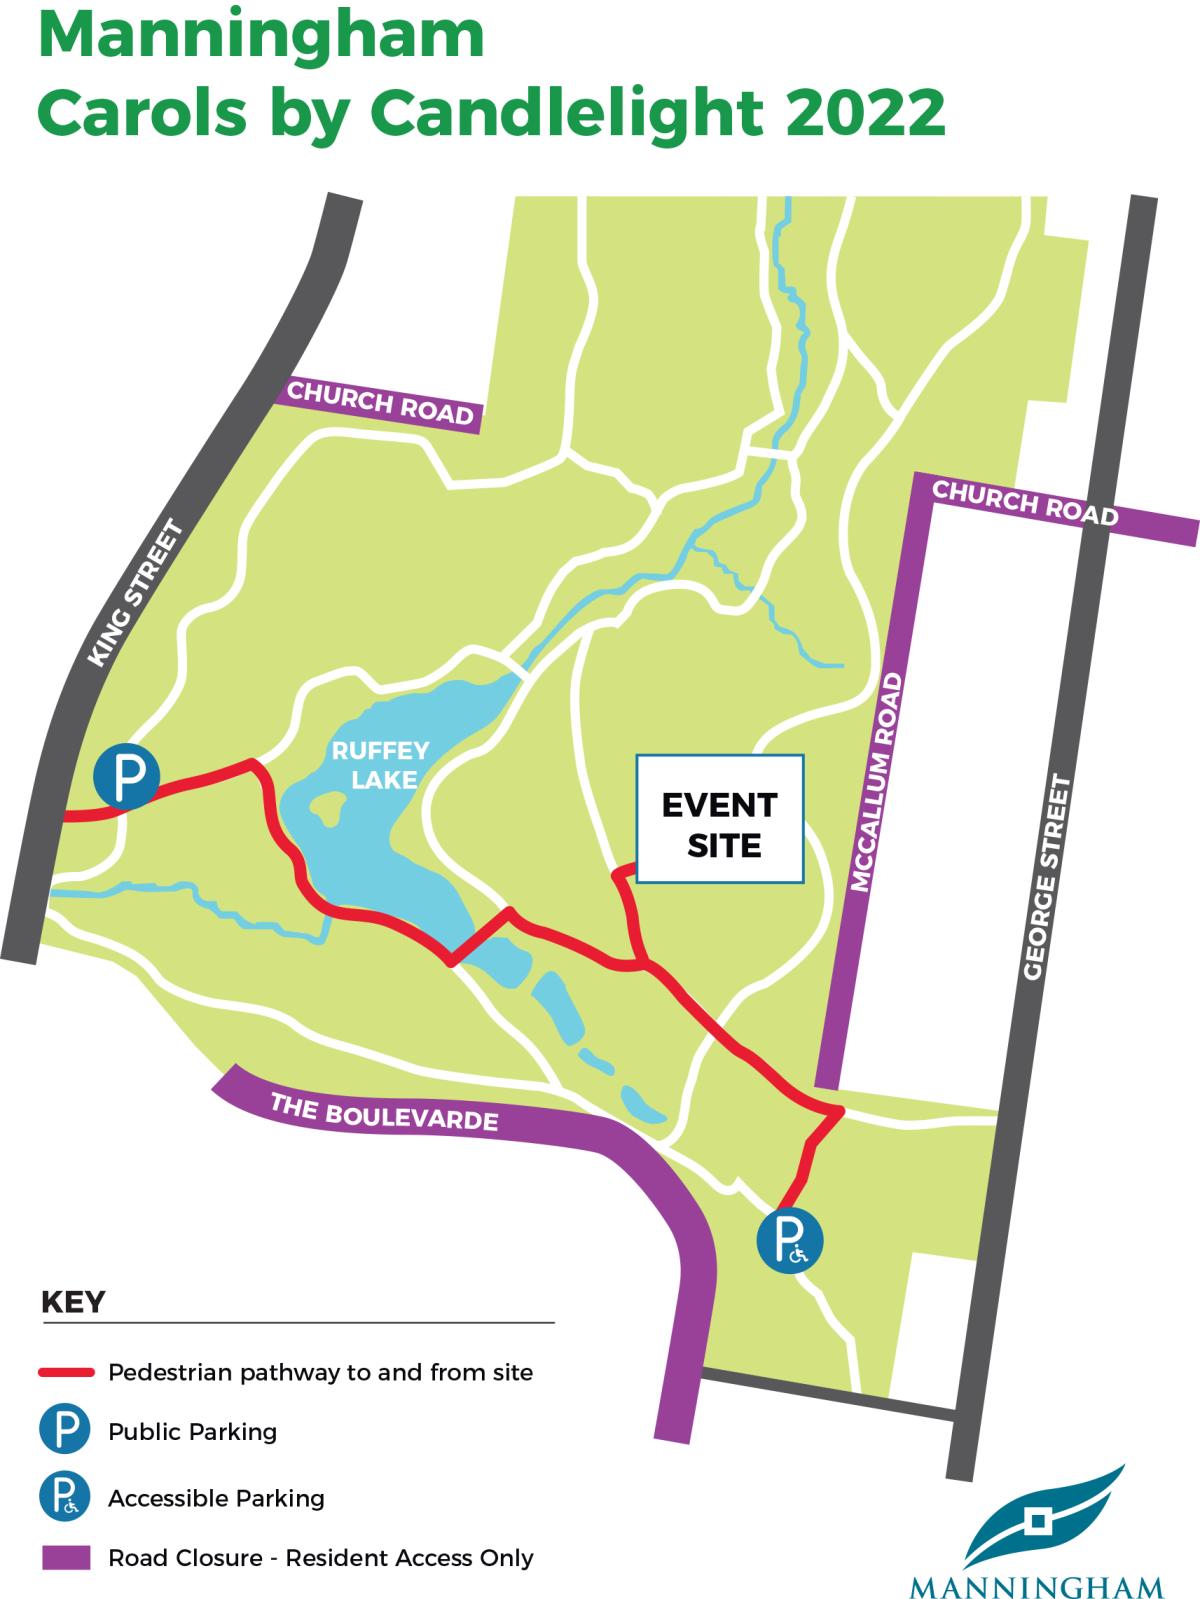 Map of Ruffey Lake Park showing the Carols event site